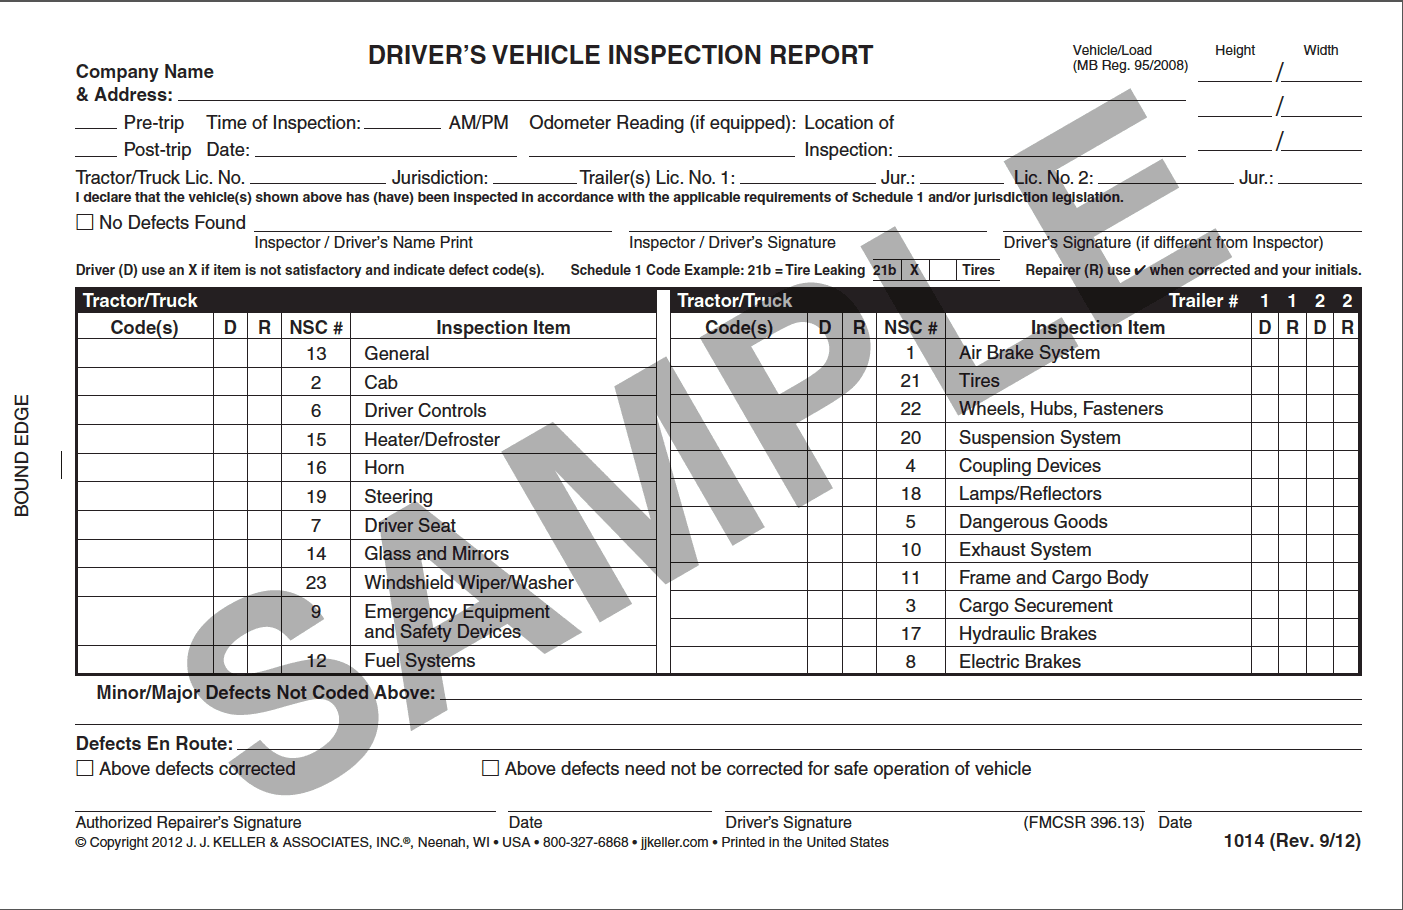 Vehicle Inspection Reports - English - ICC USA